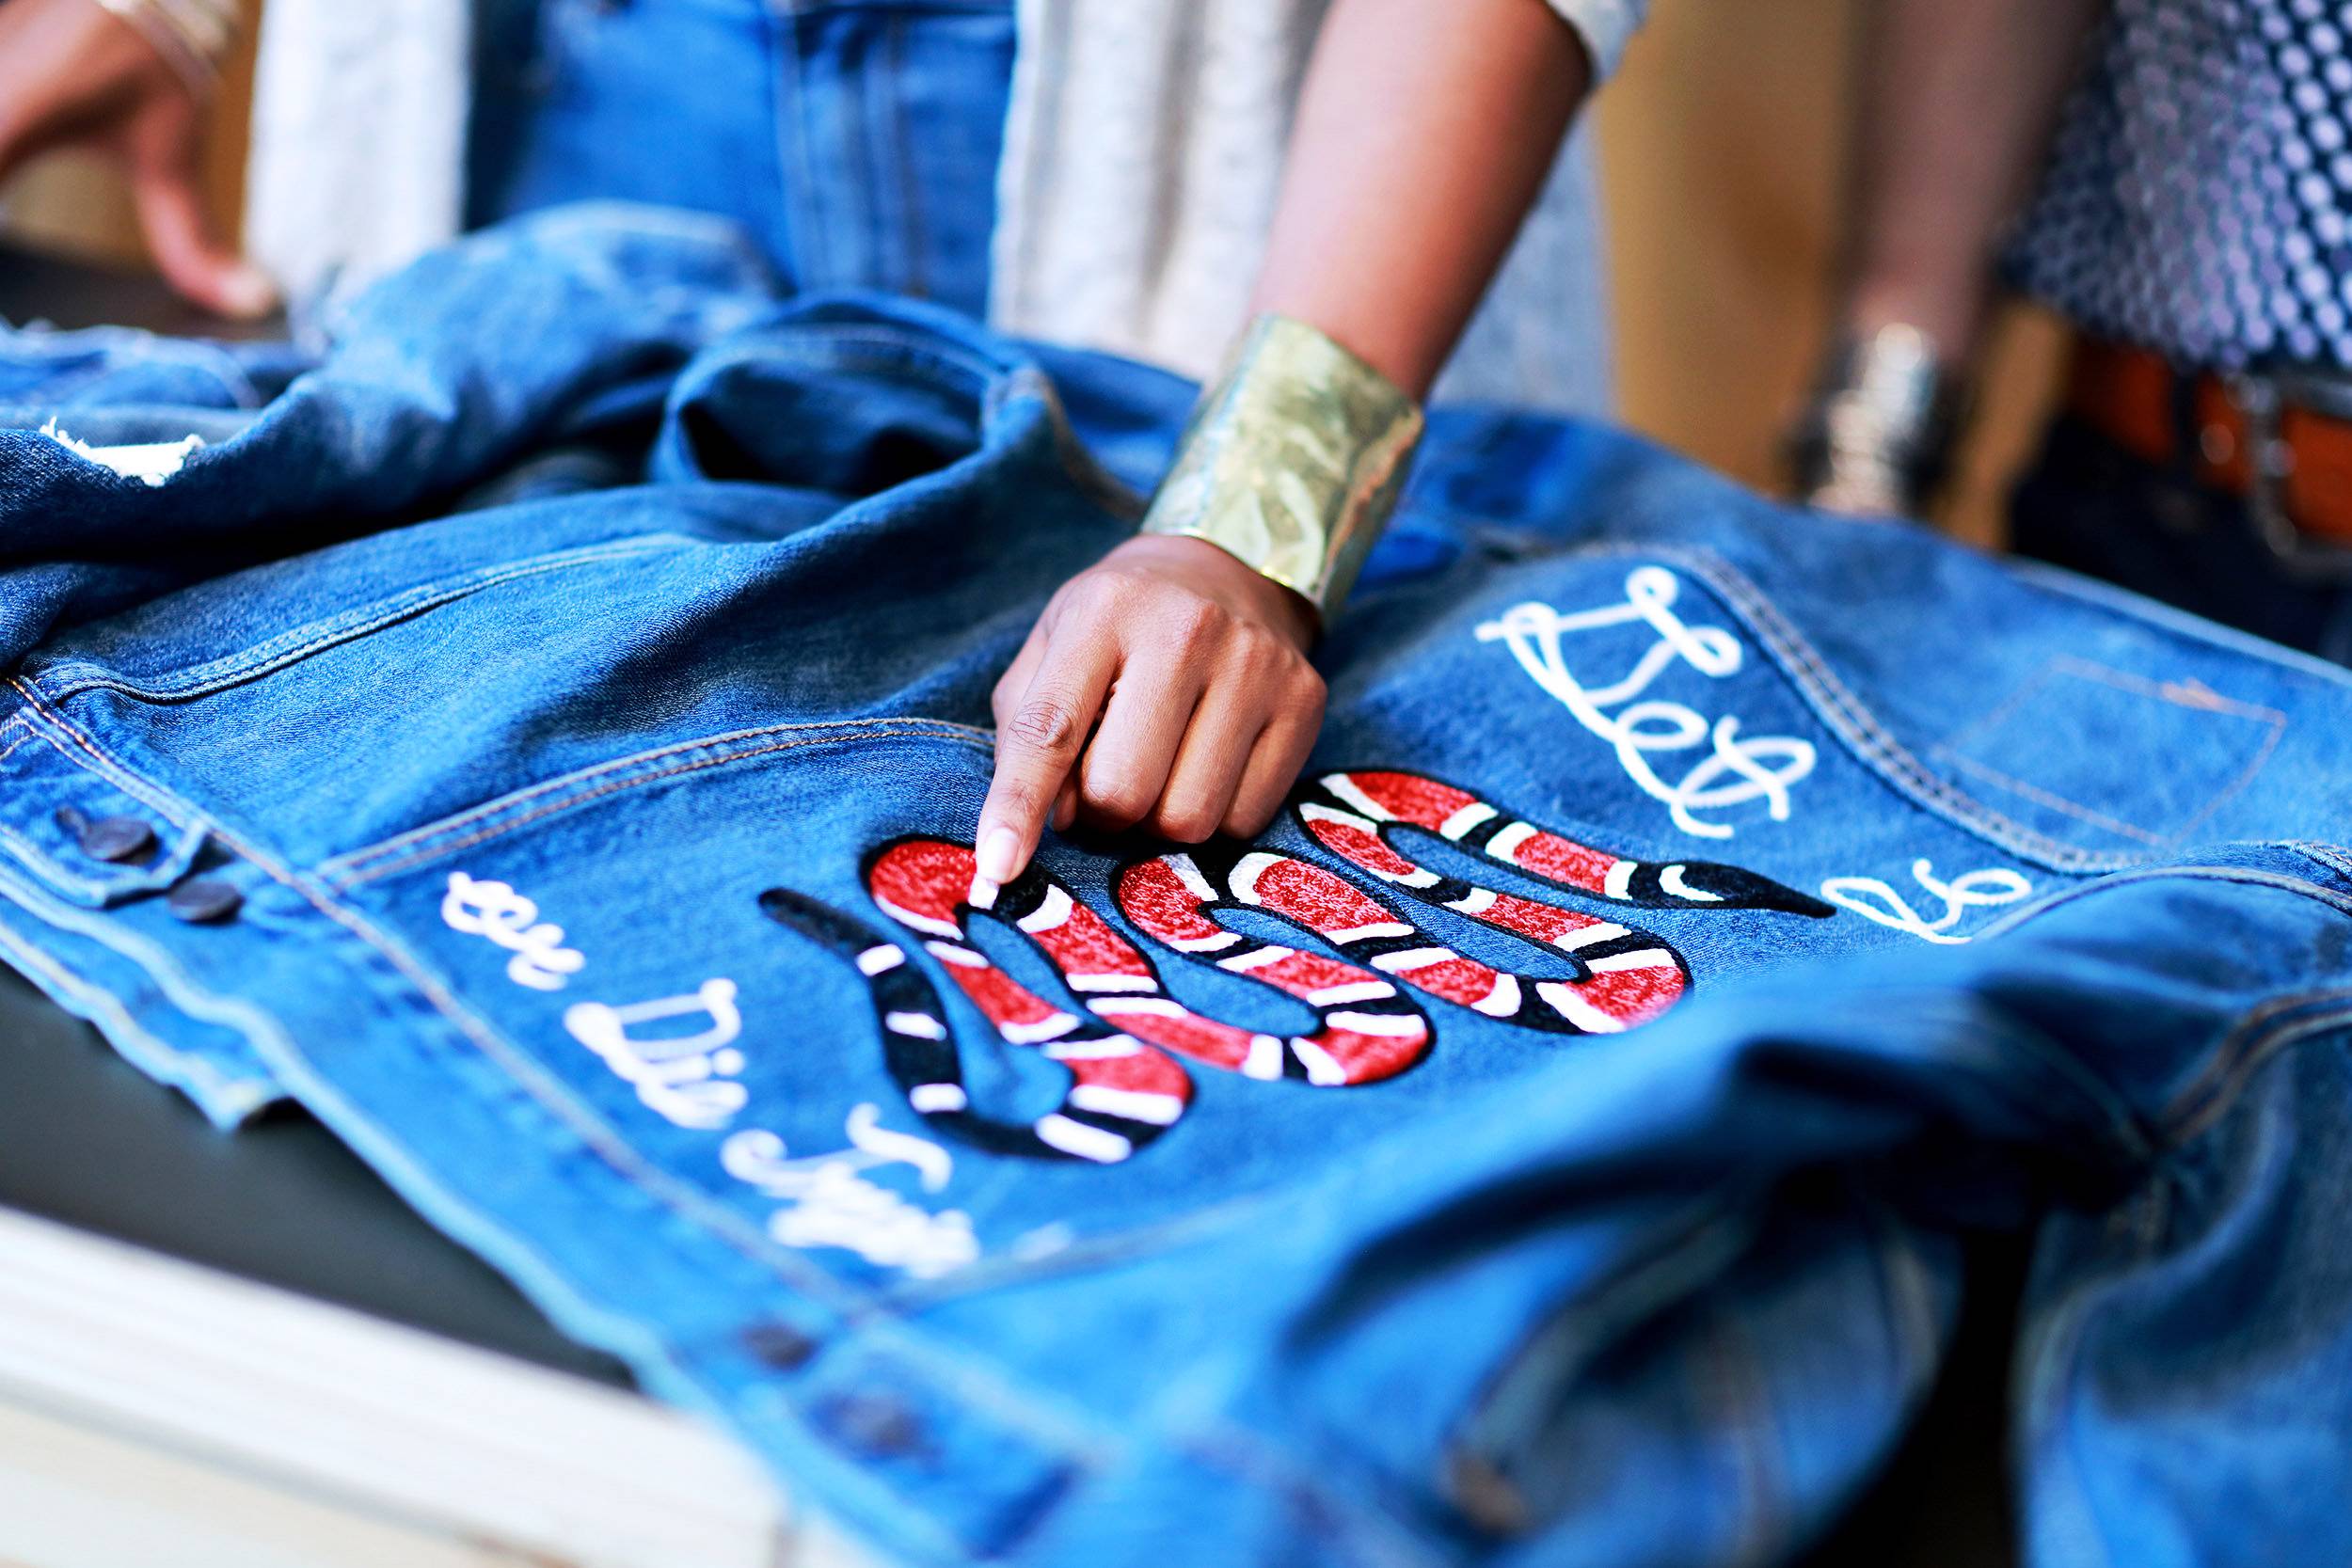 The Levi's Tailor Shop - Image 1 from Here's What You Can Make at Levi's  Denim Tailor Shop | BET